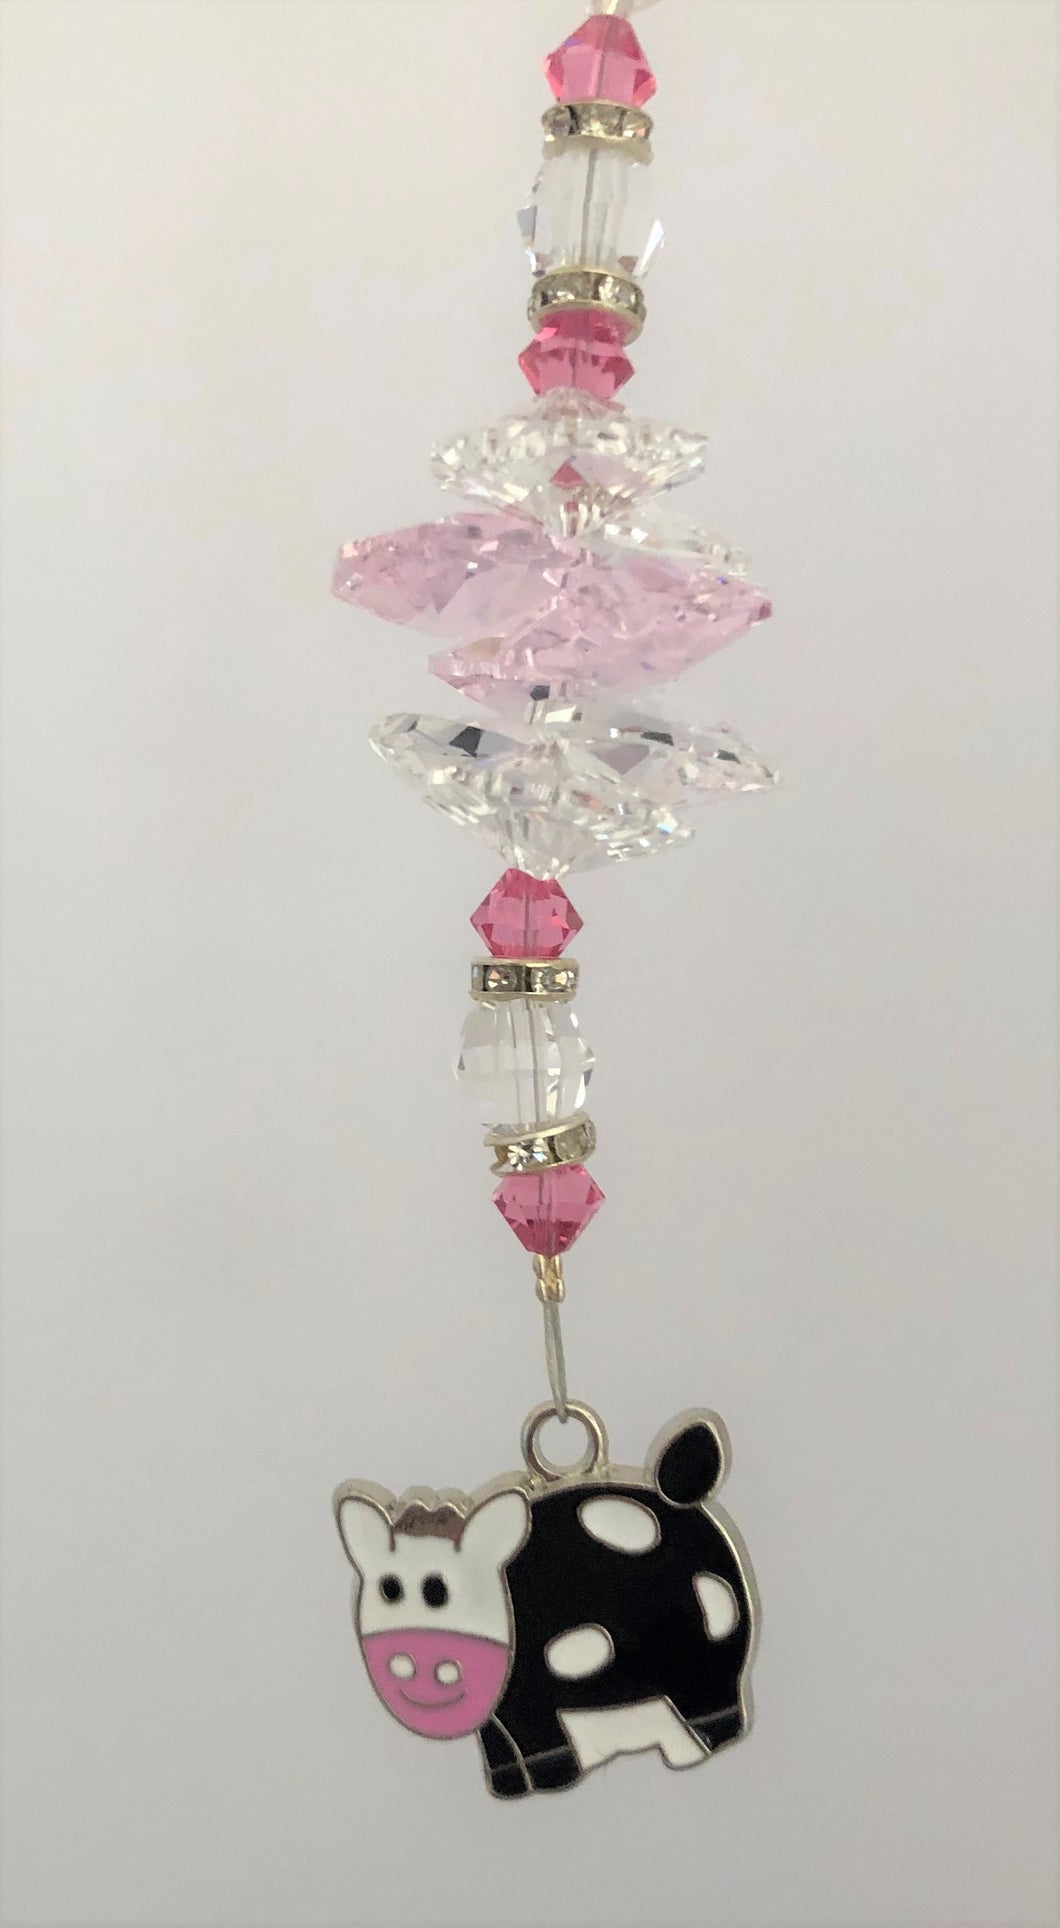 This beautiful Cow  suncatcher which is decorated with crystals and Rose Quartz